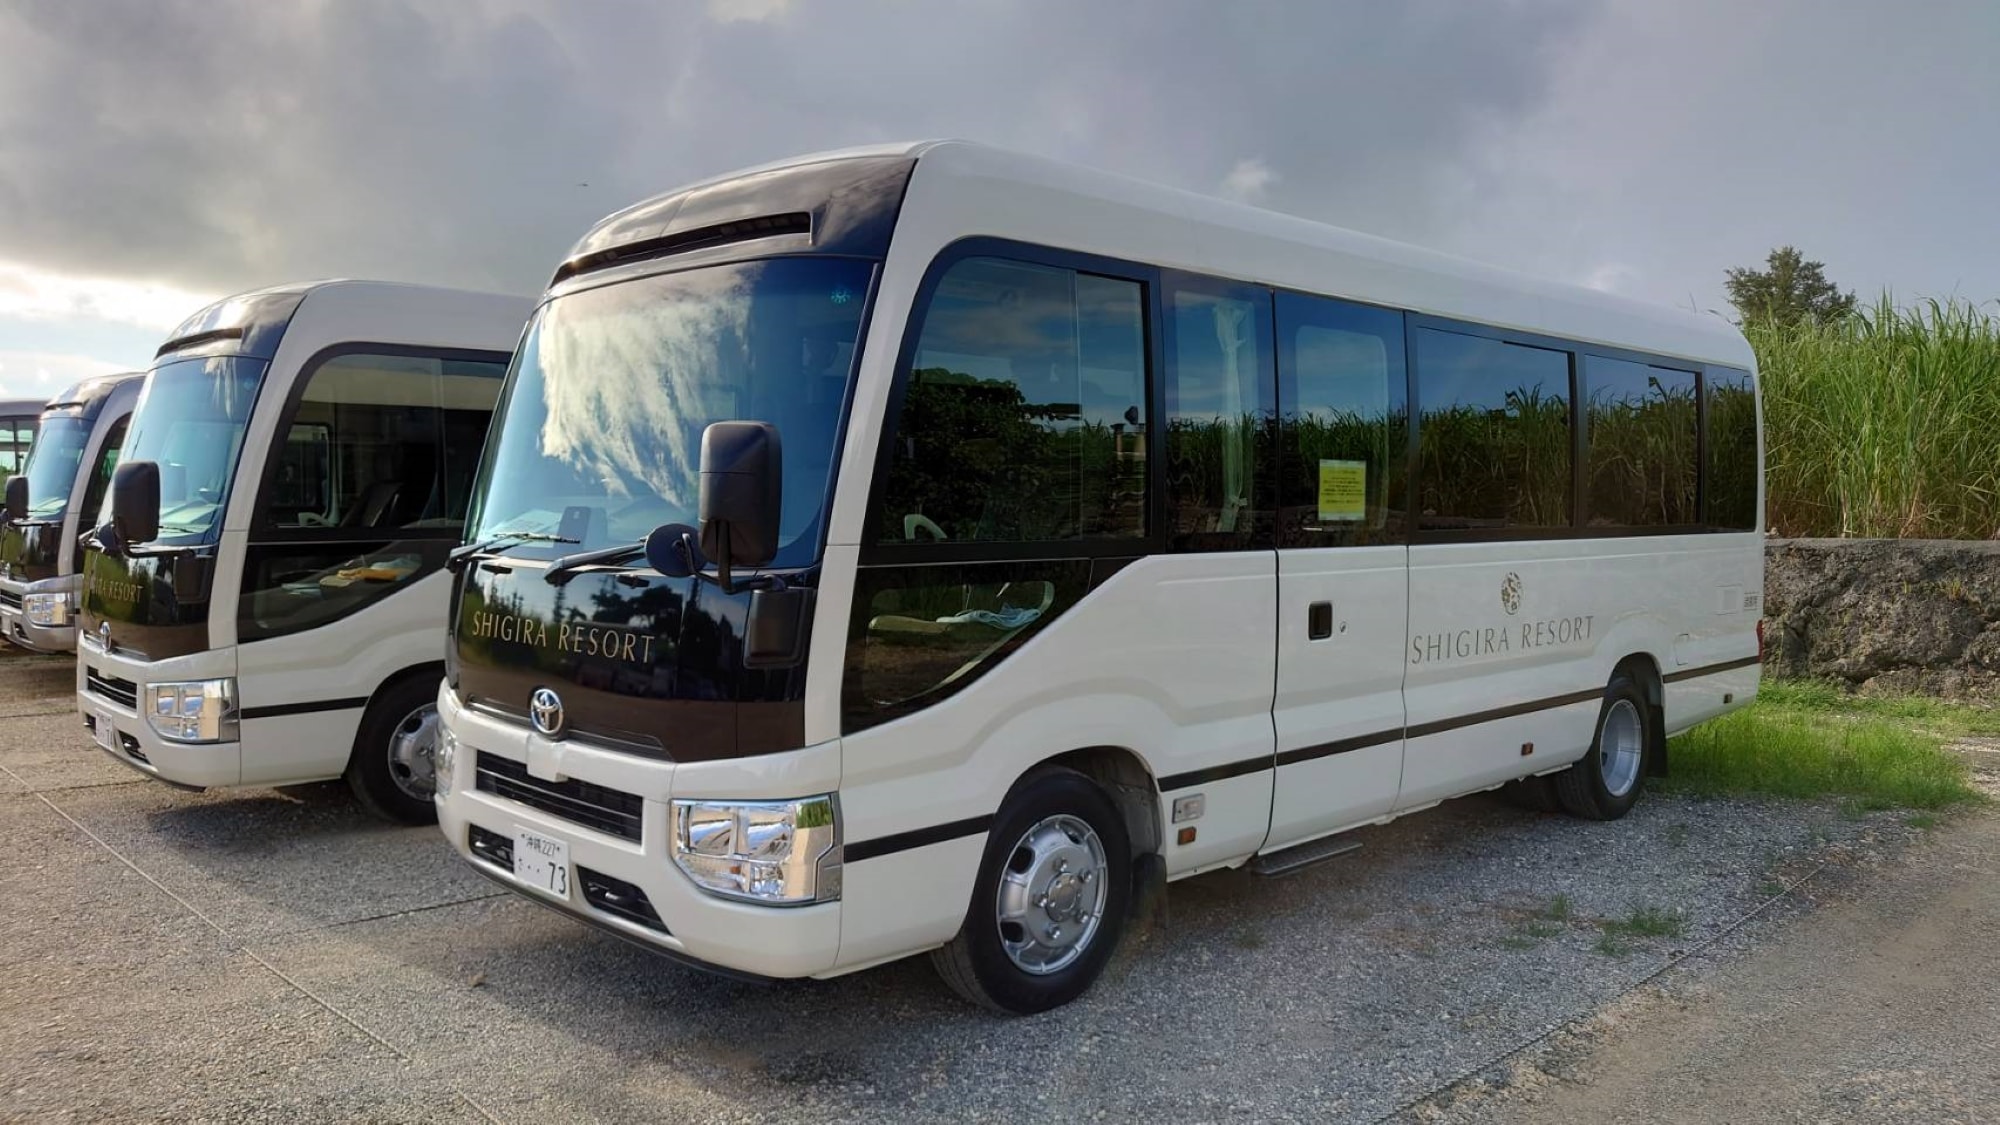 [Resort shuttle bus] A shuttle bus connecting each facility operates from 9:00 to 22:00.